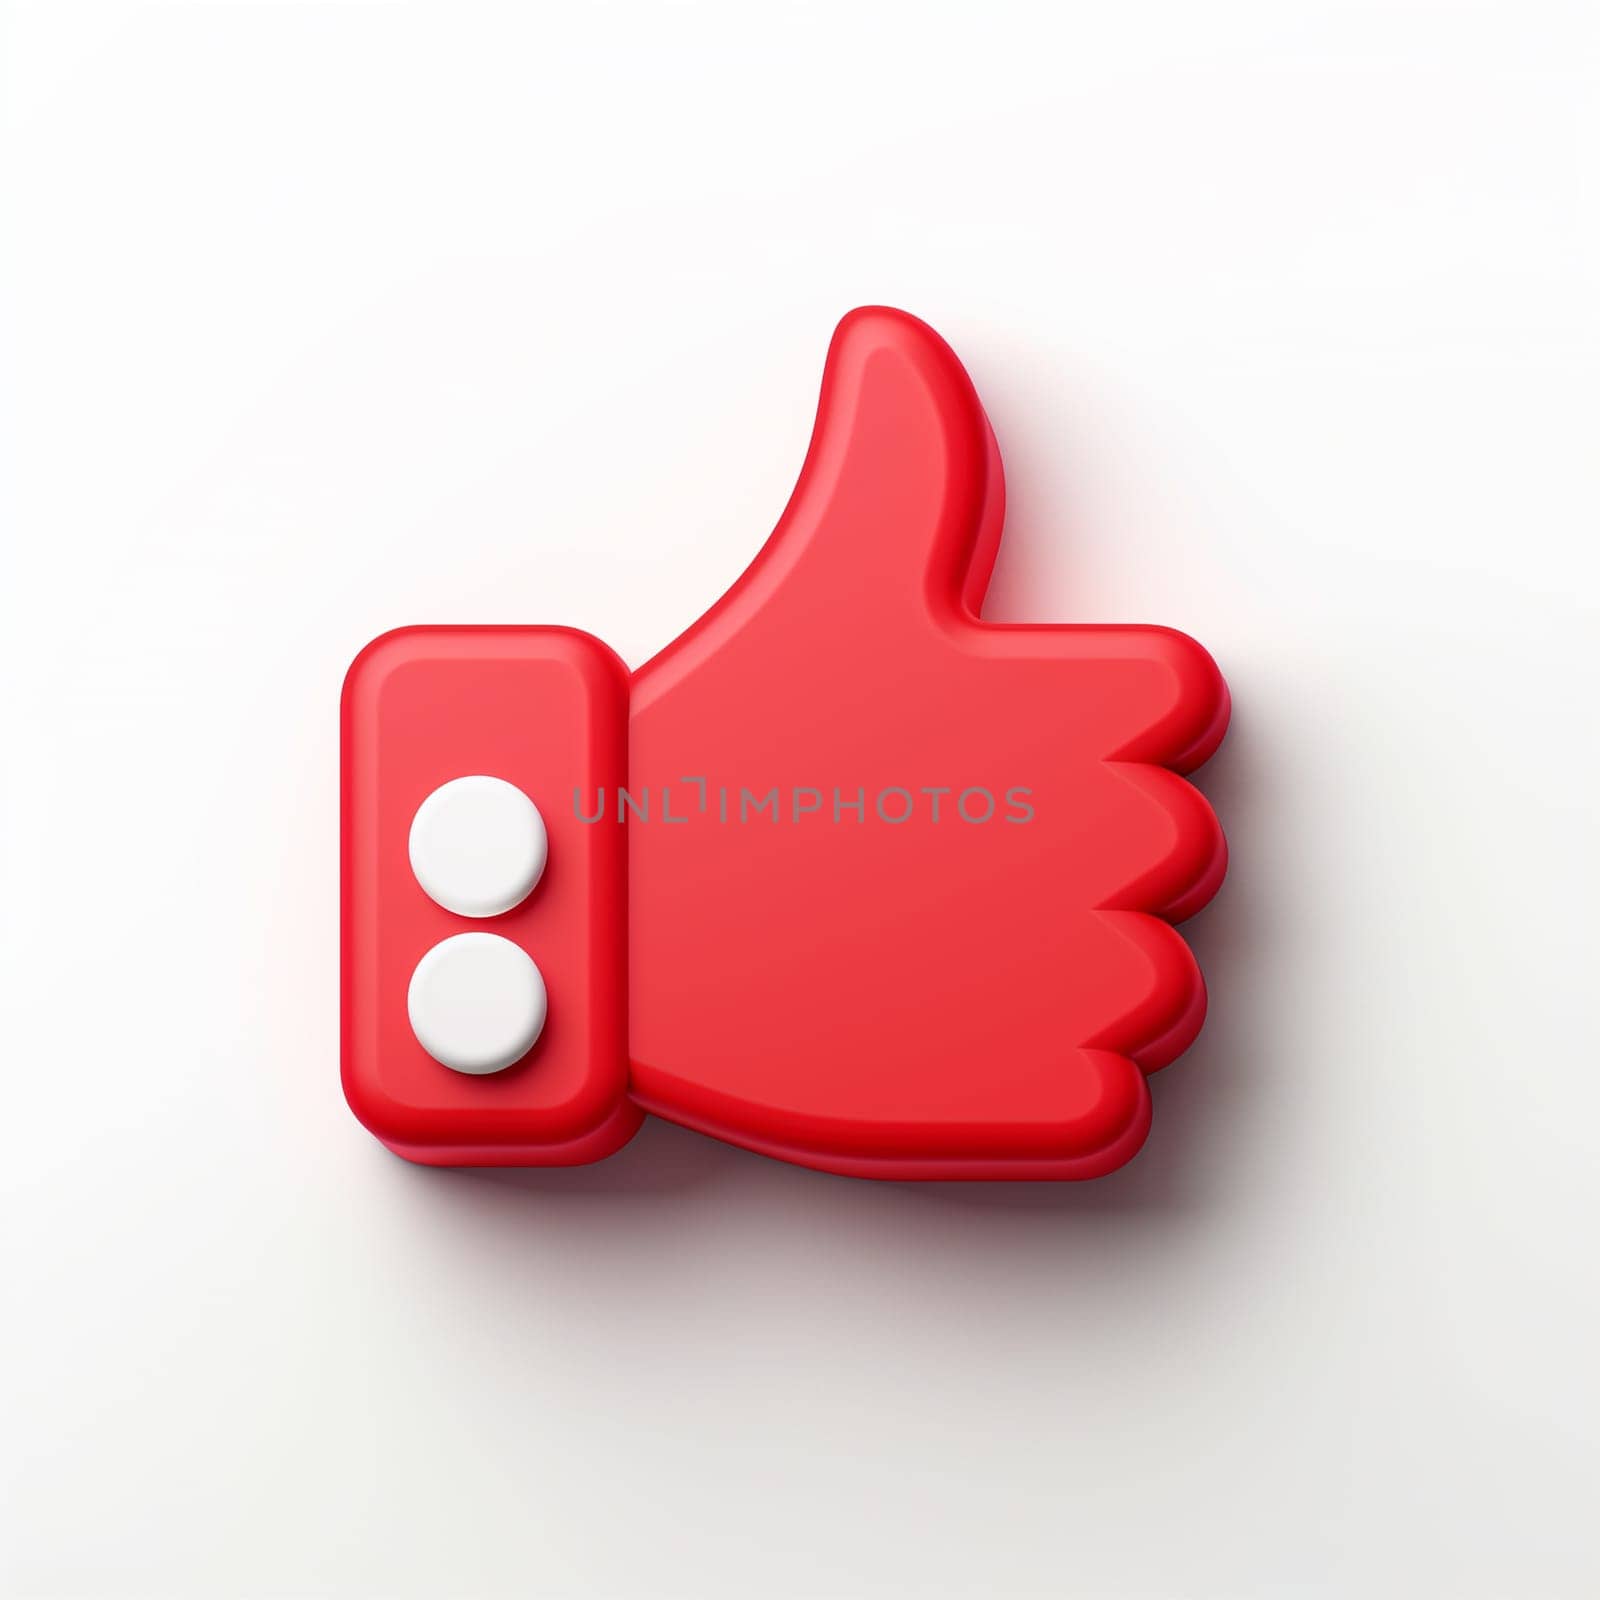 Red Thumbs Up Sign on White Background by Sd28DimoN_1976